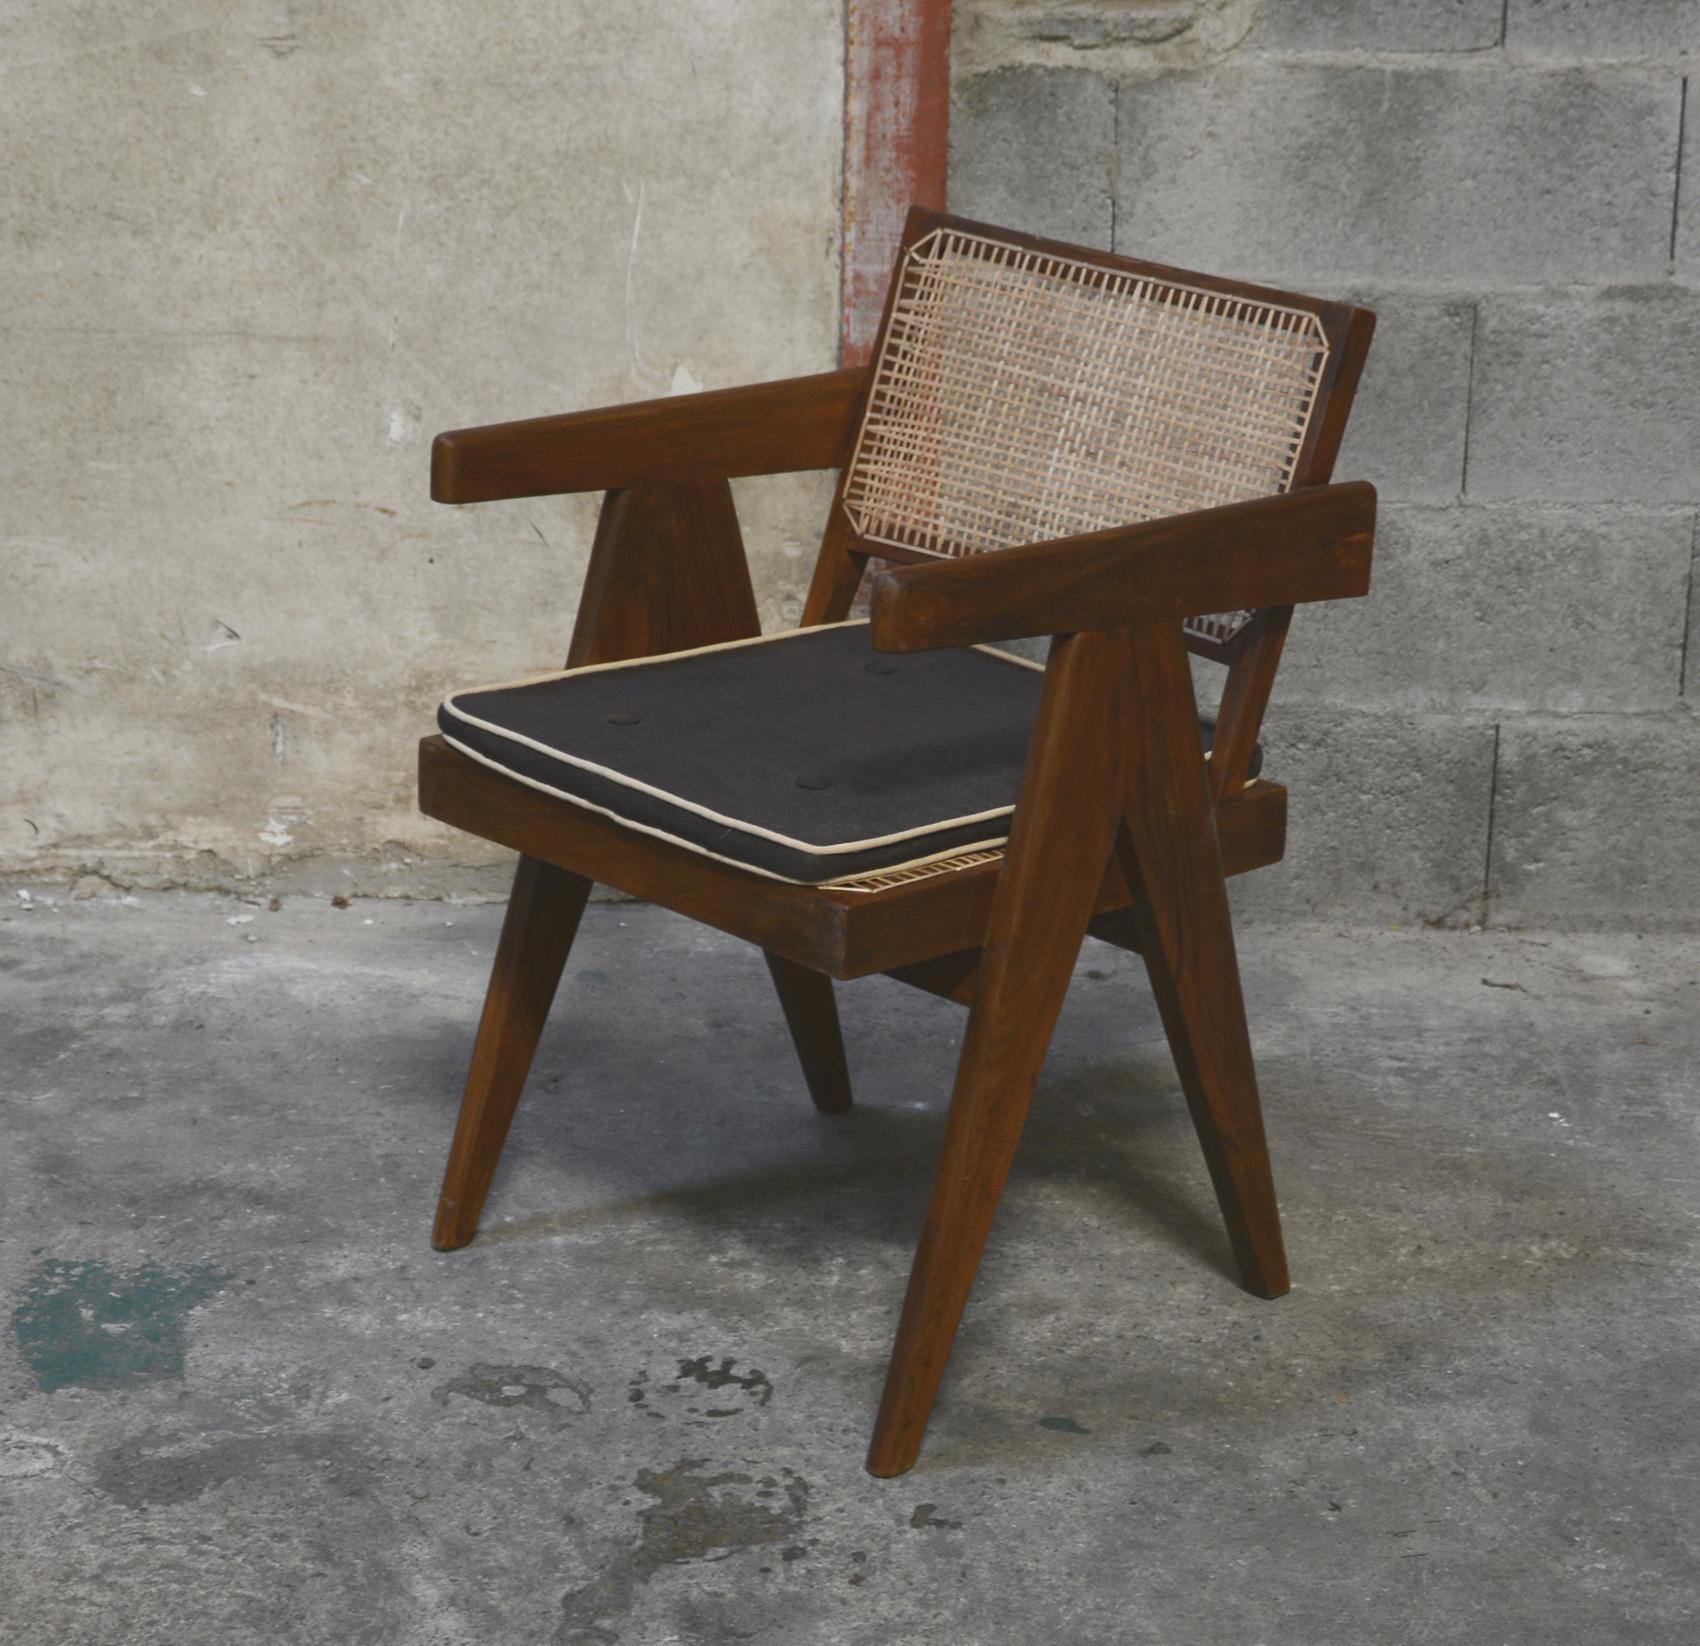 Pierre Jeanneret, rare set of 8 cane and teak wood office Armchairs designed for administrative buildings in Chandigarh, India. Back attached to the seat. Teak, woven cane and upholstered seat cushion featuring cloth covering. 5 chairs have their